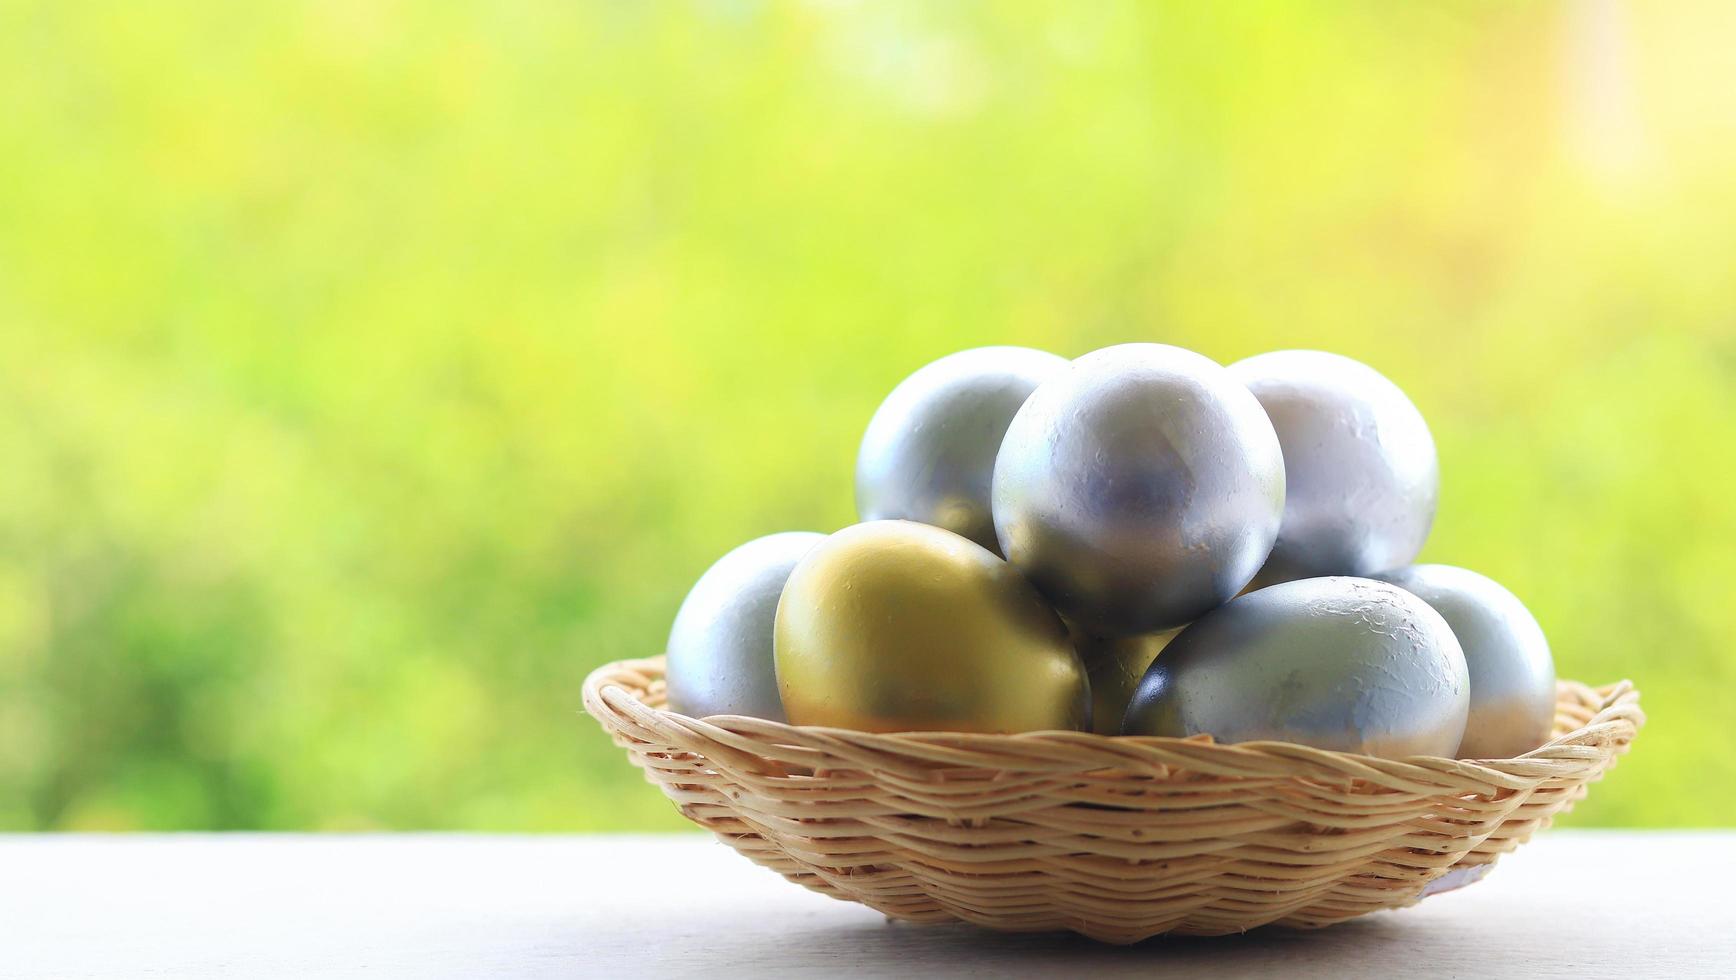 Basket of eggs for Easter on a natural blur background photo